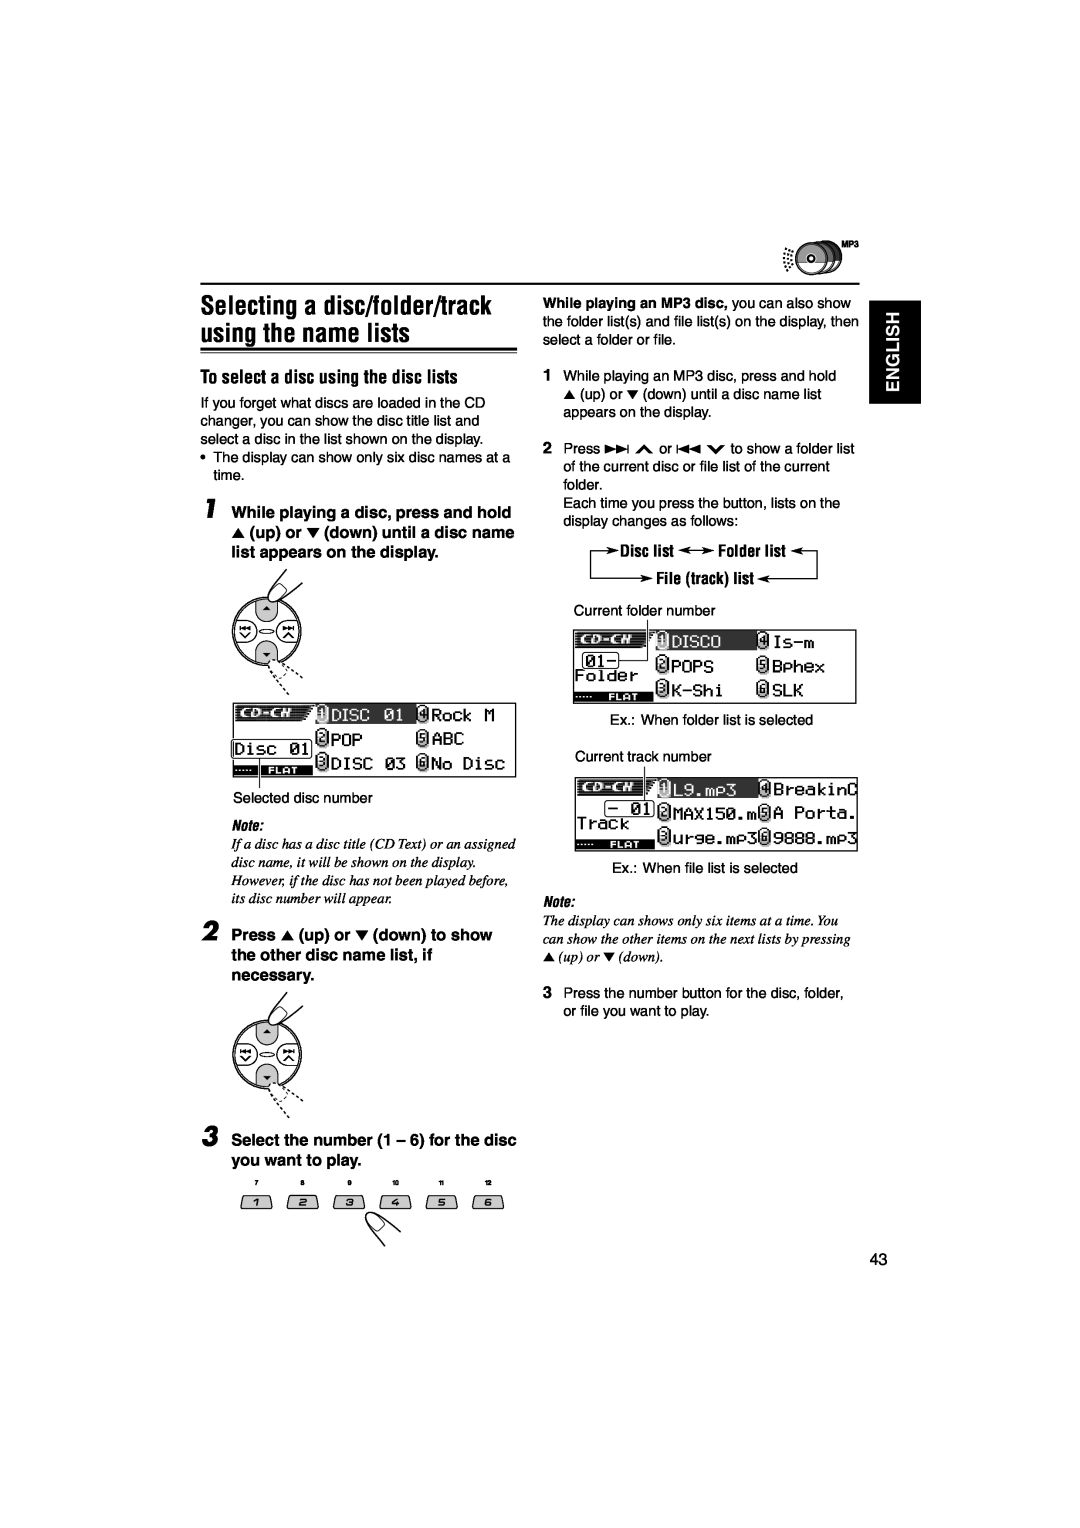 JVC KD-LH1101 manual To select a disc using the disc lists, English, While playing a disc, press and hold 